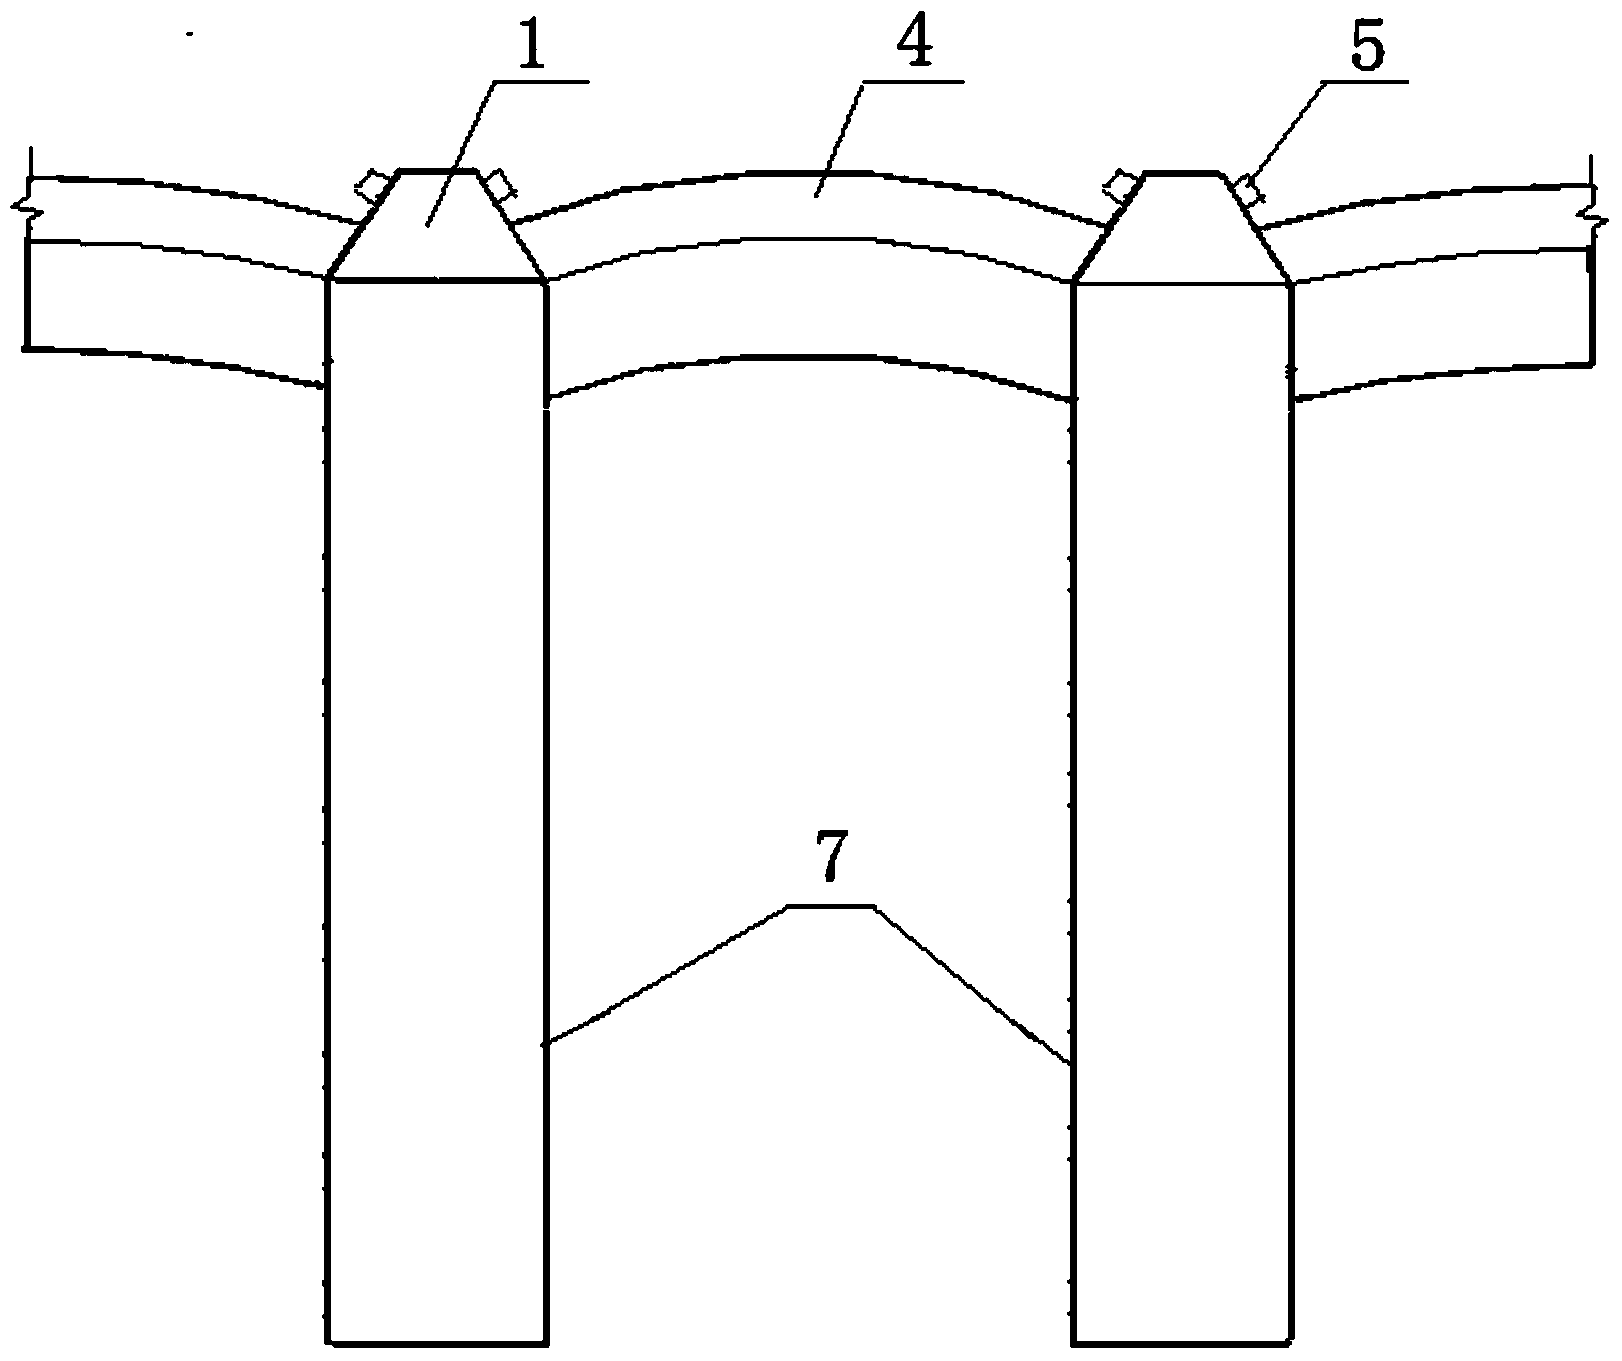 Anti-slide pile of jointed arch structure